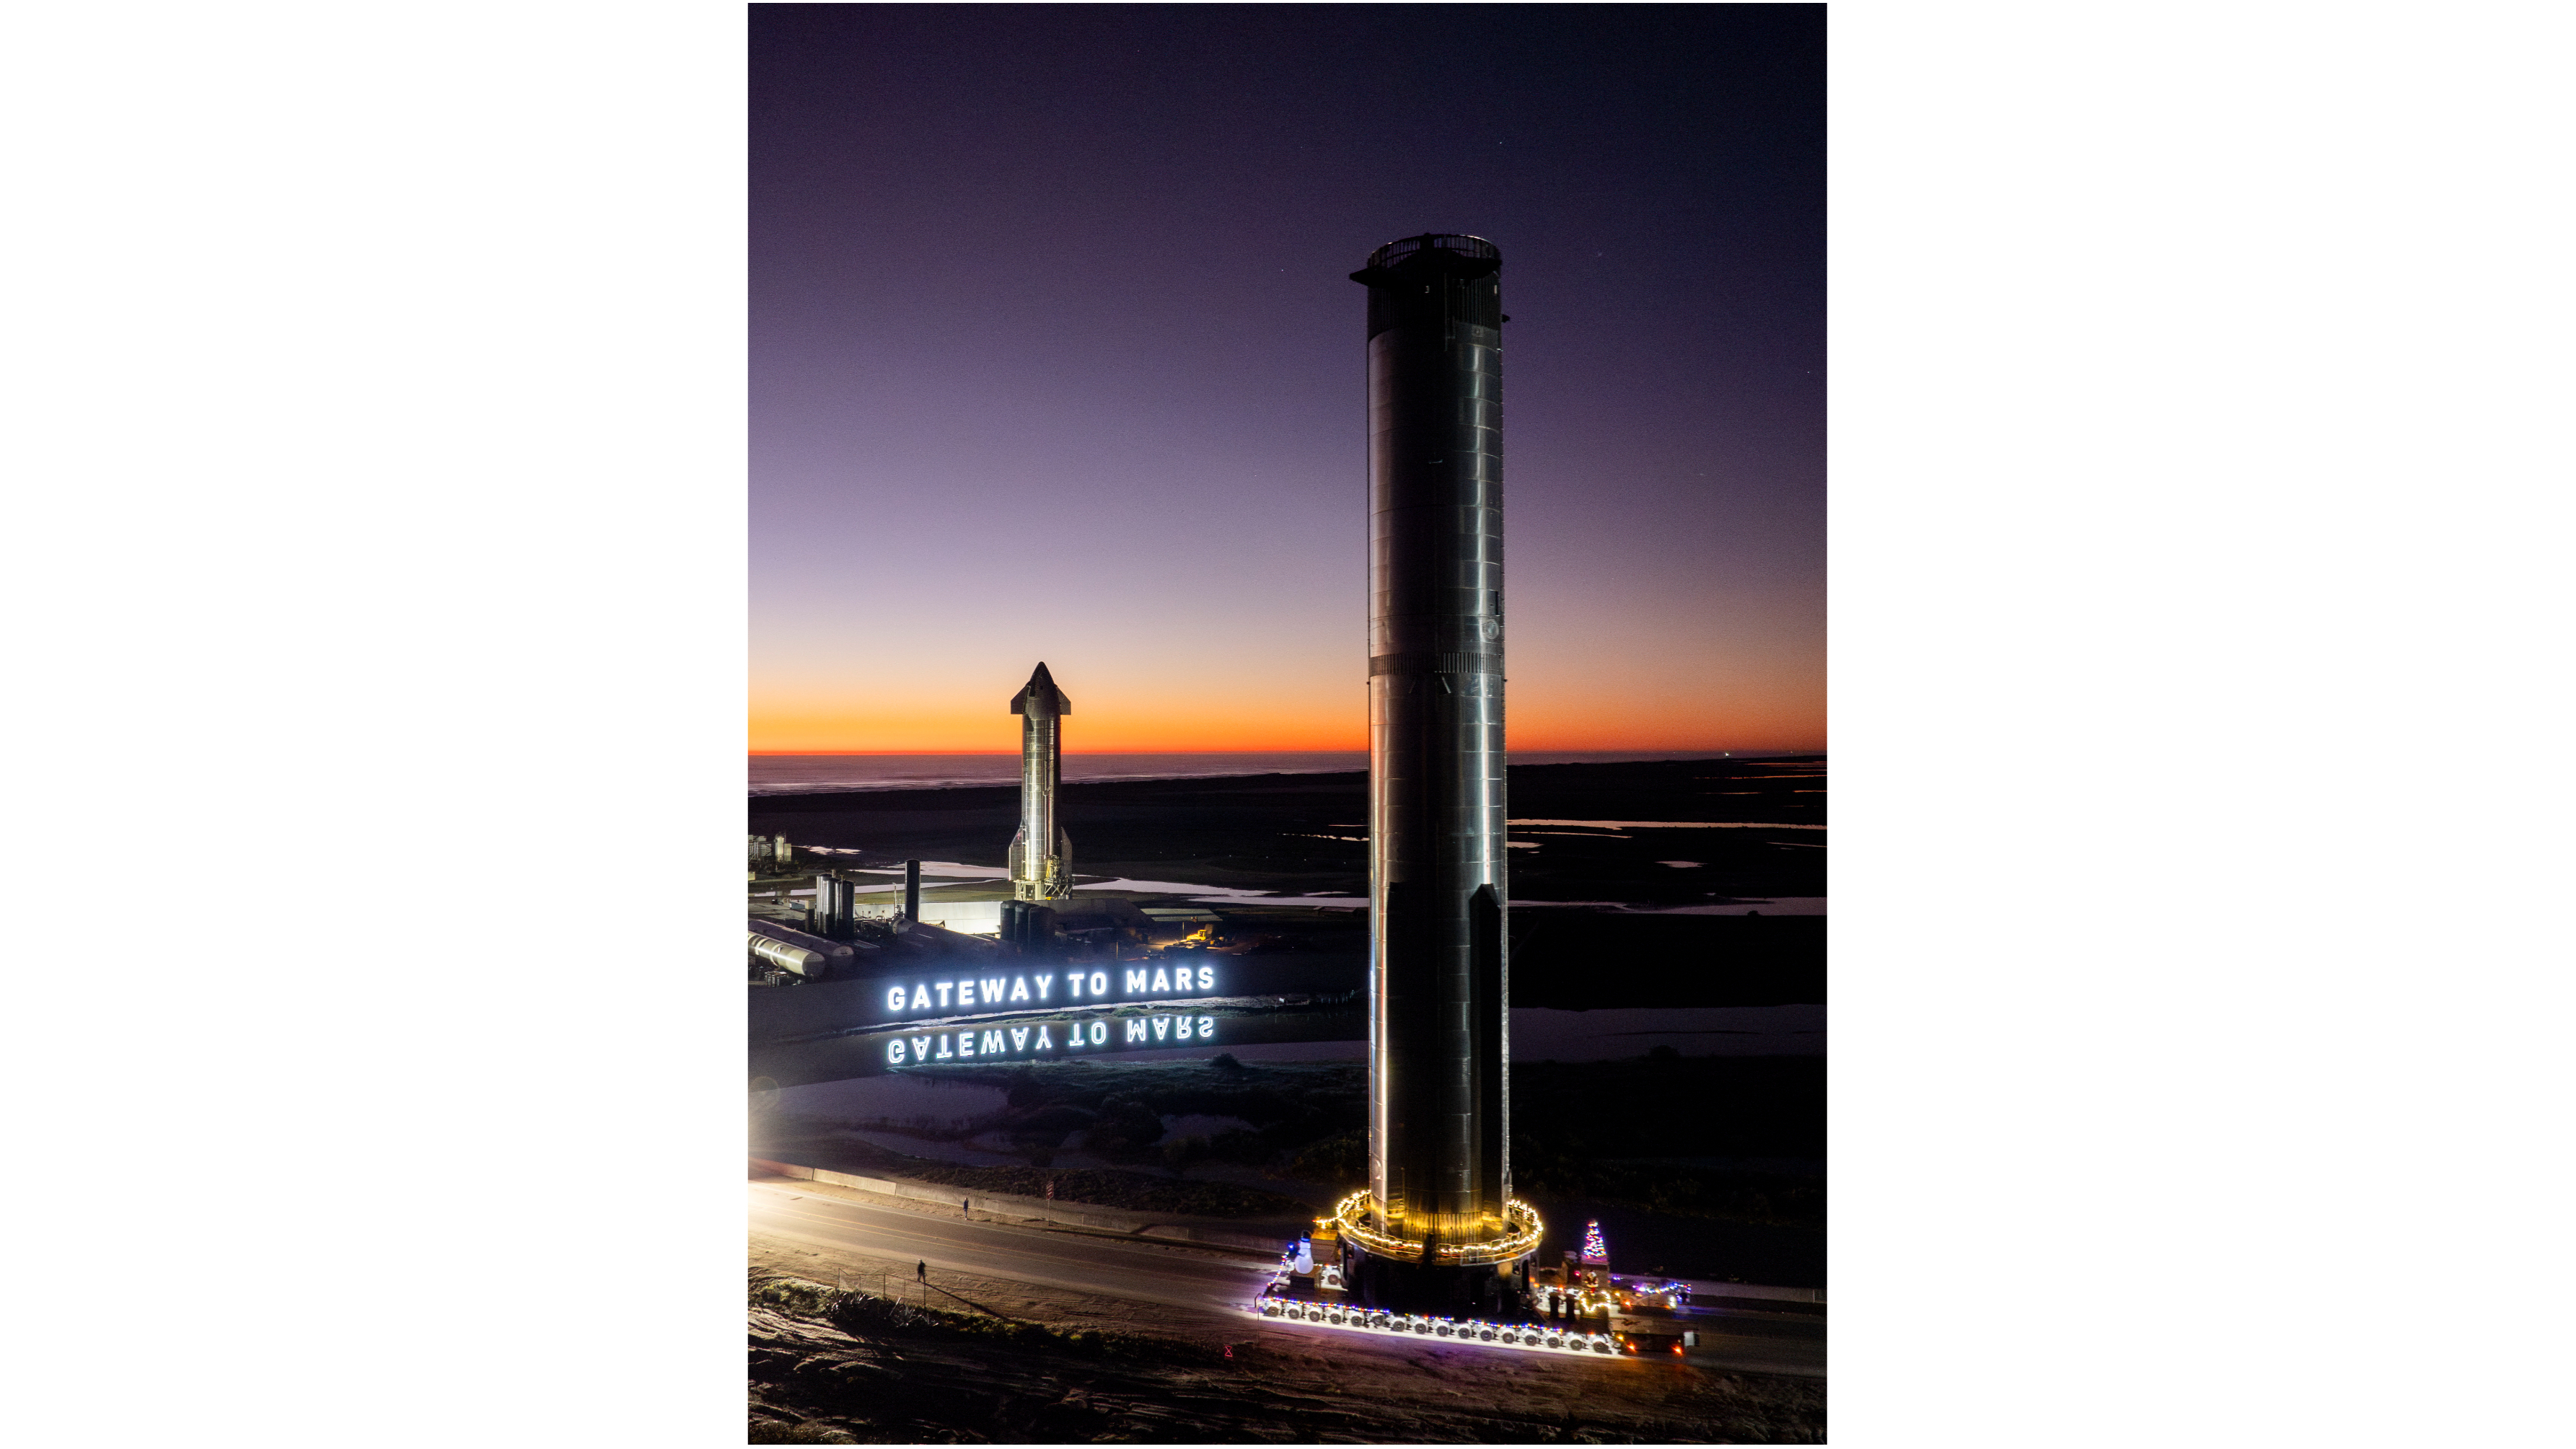 The rocket's booster and upper stage are positioned vertically against a dark sky, near a white illuminated sign that says 